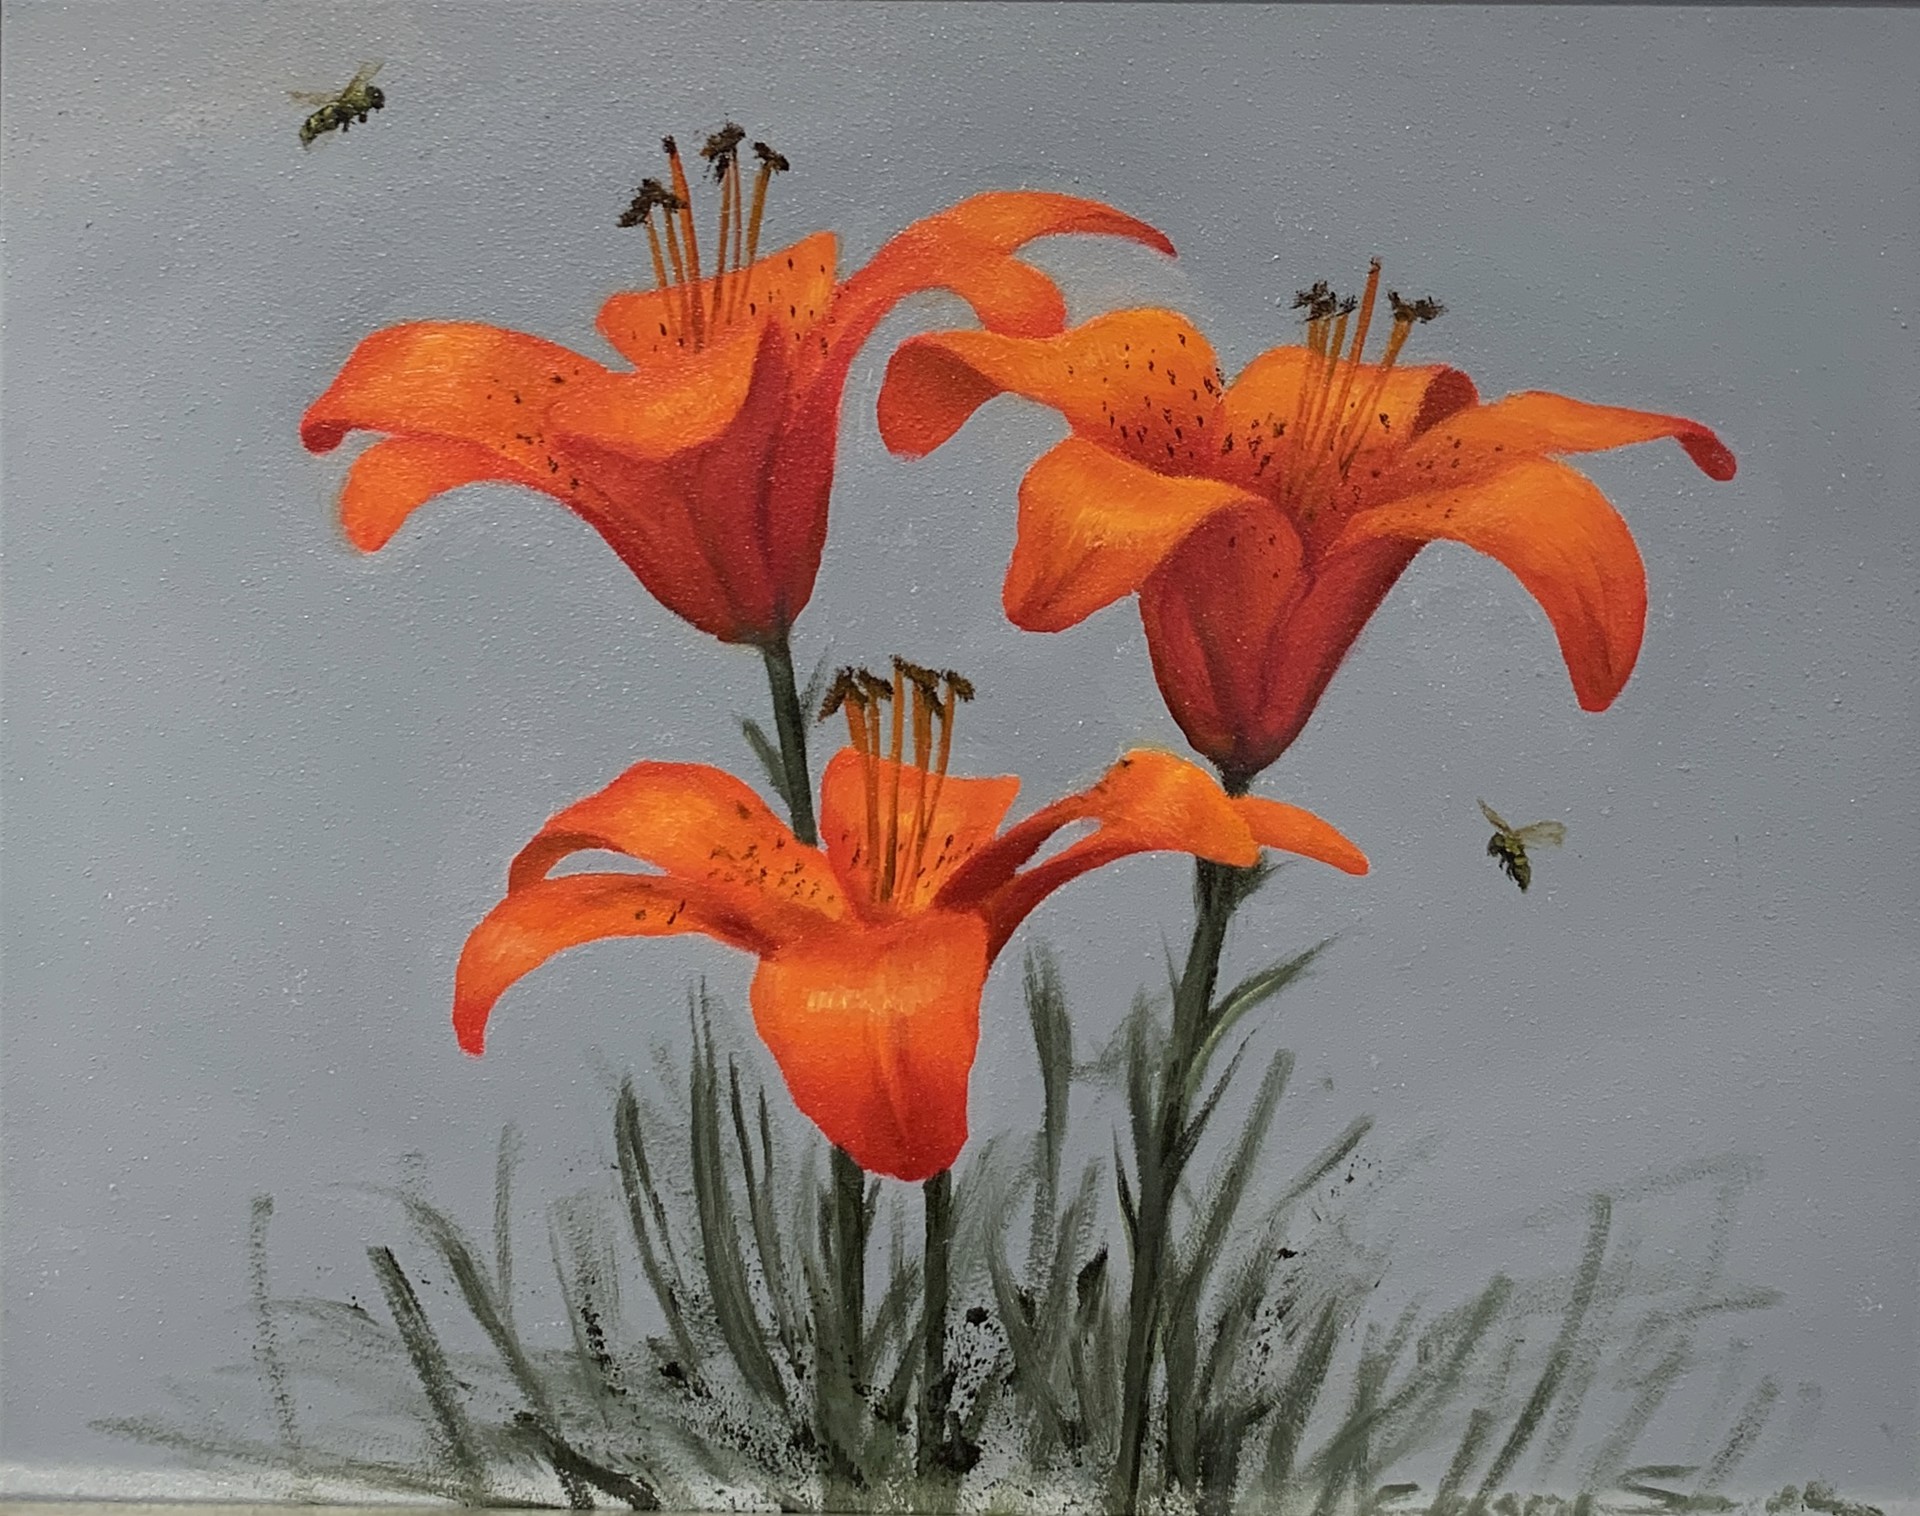 Lillies by Gregory Smith